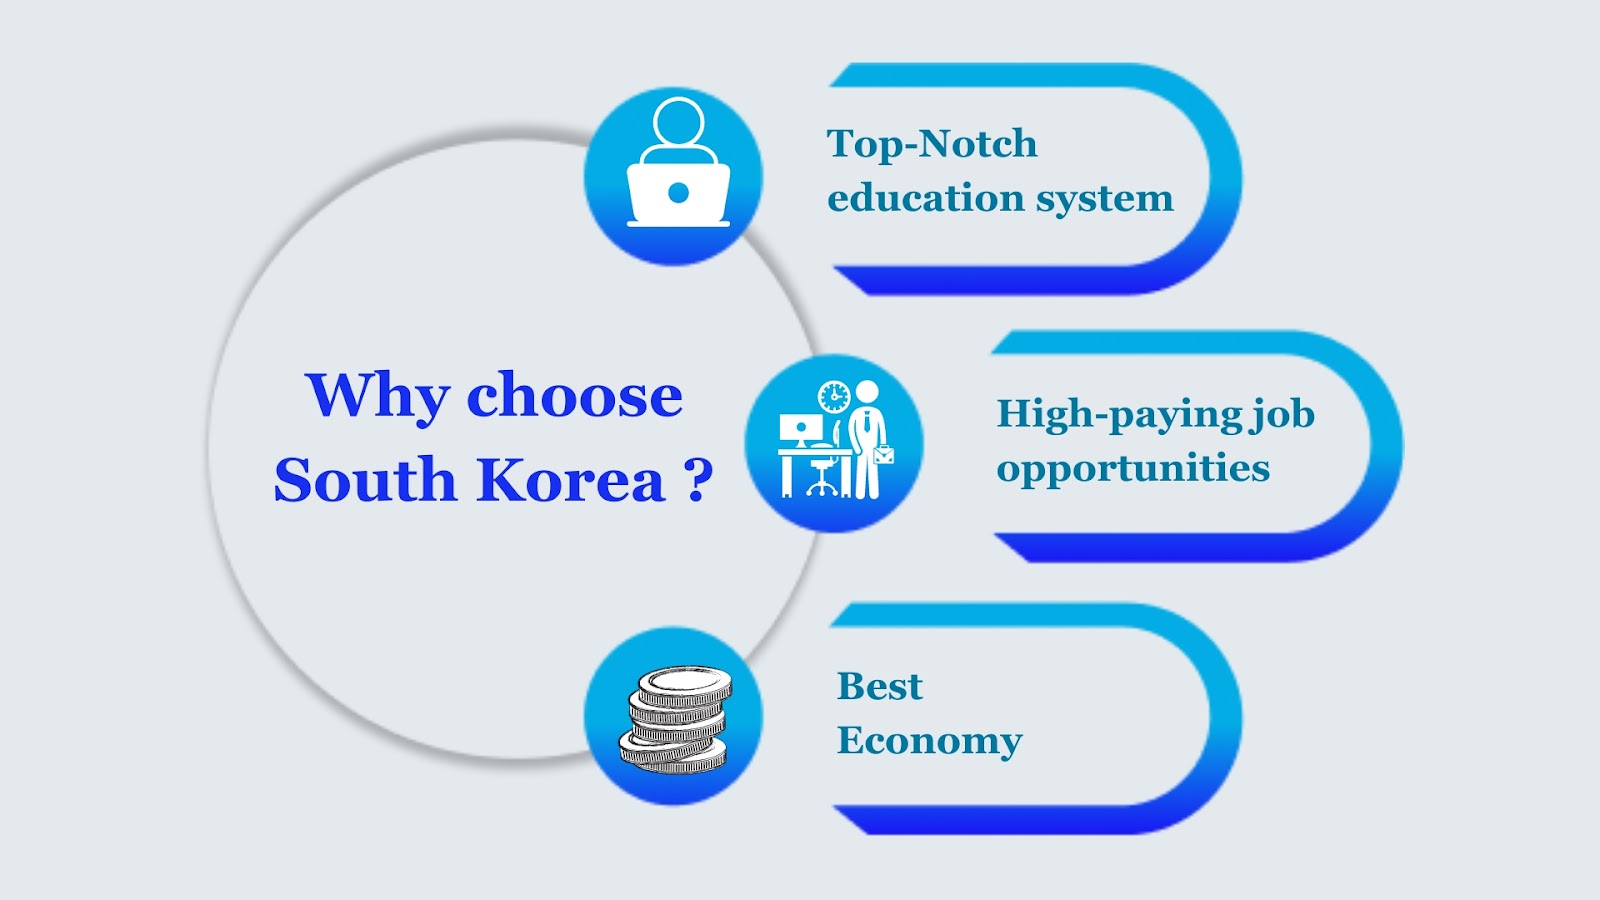 What are the Top Universities in South Korea for International Students?